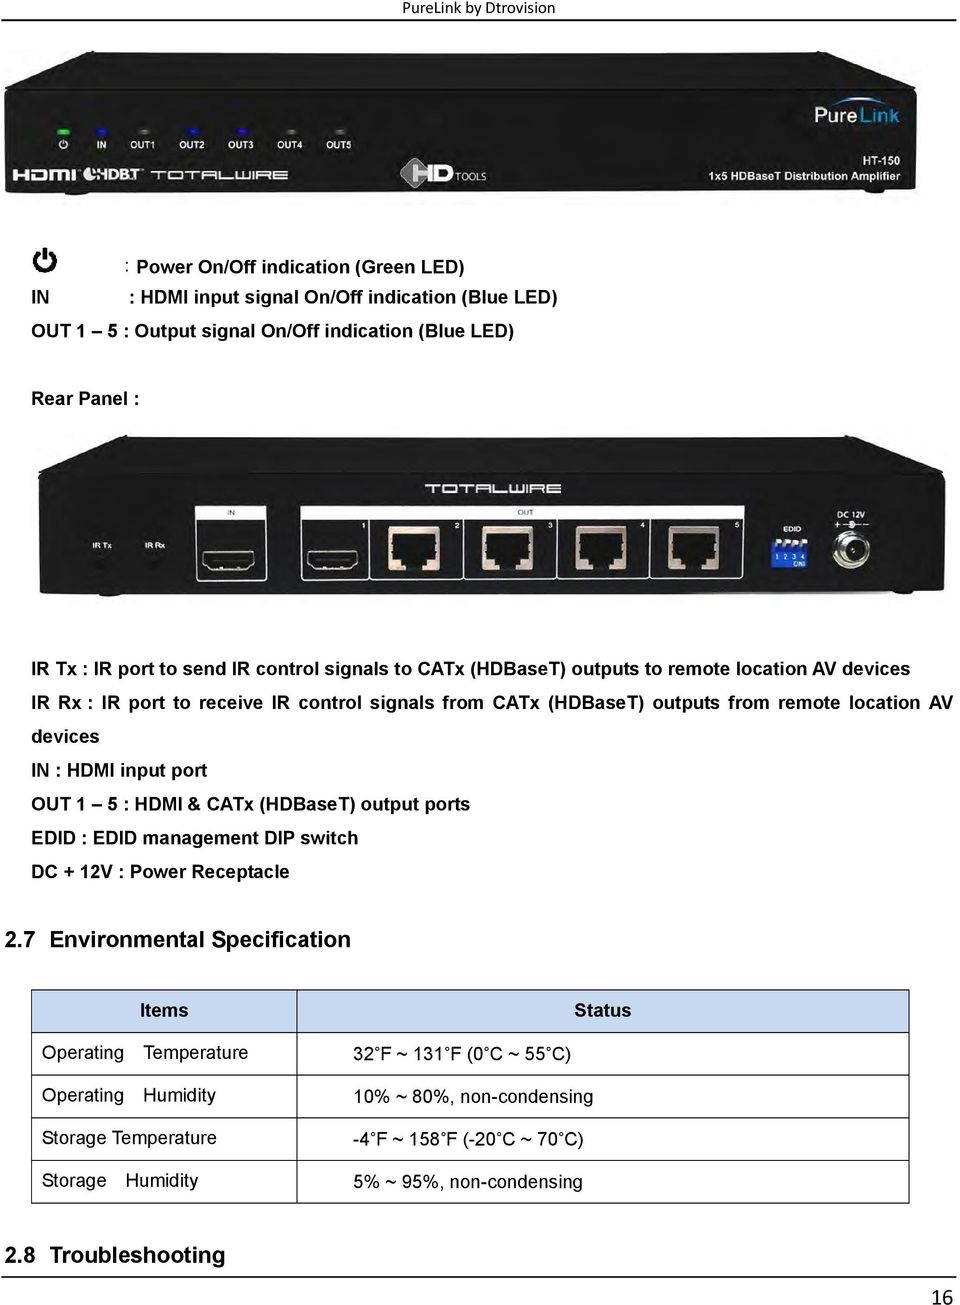 HDMI input port OUT 1 5 : HDMI & CATx (HDBaseT) output ports EDID : EDID management DIP switch DC + 12V : Power Receptacle 2.